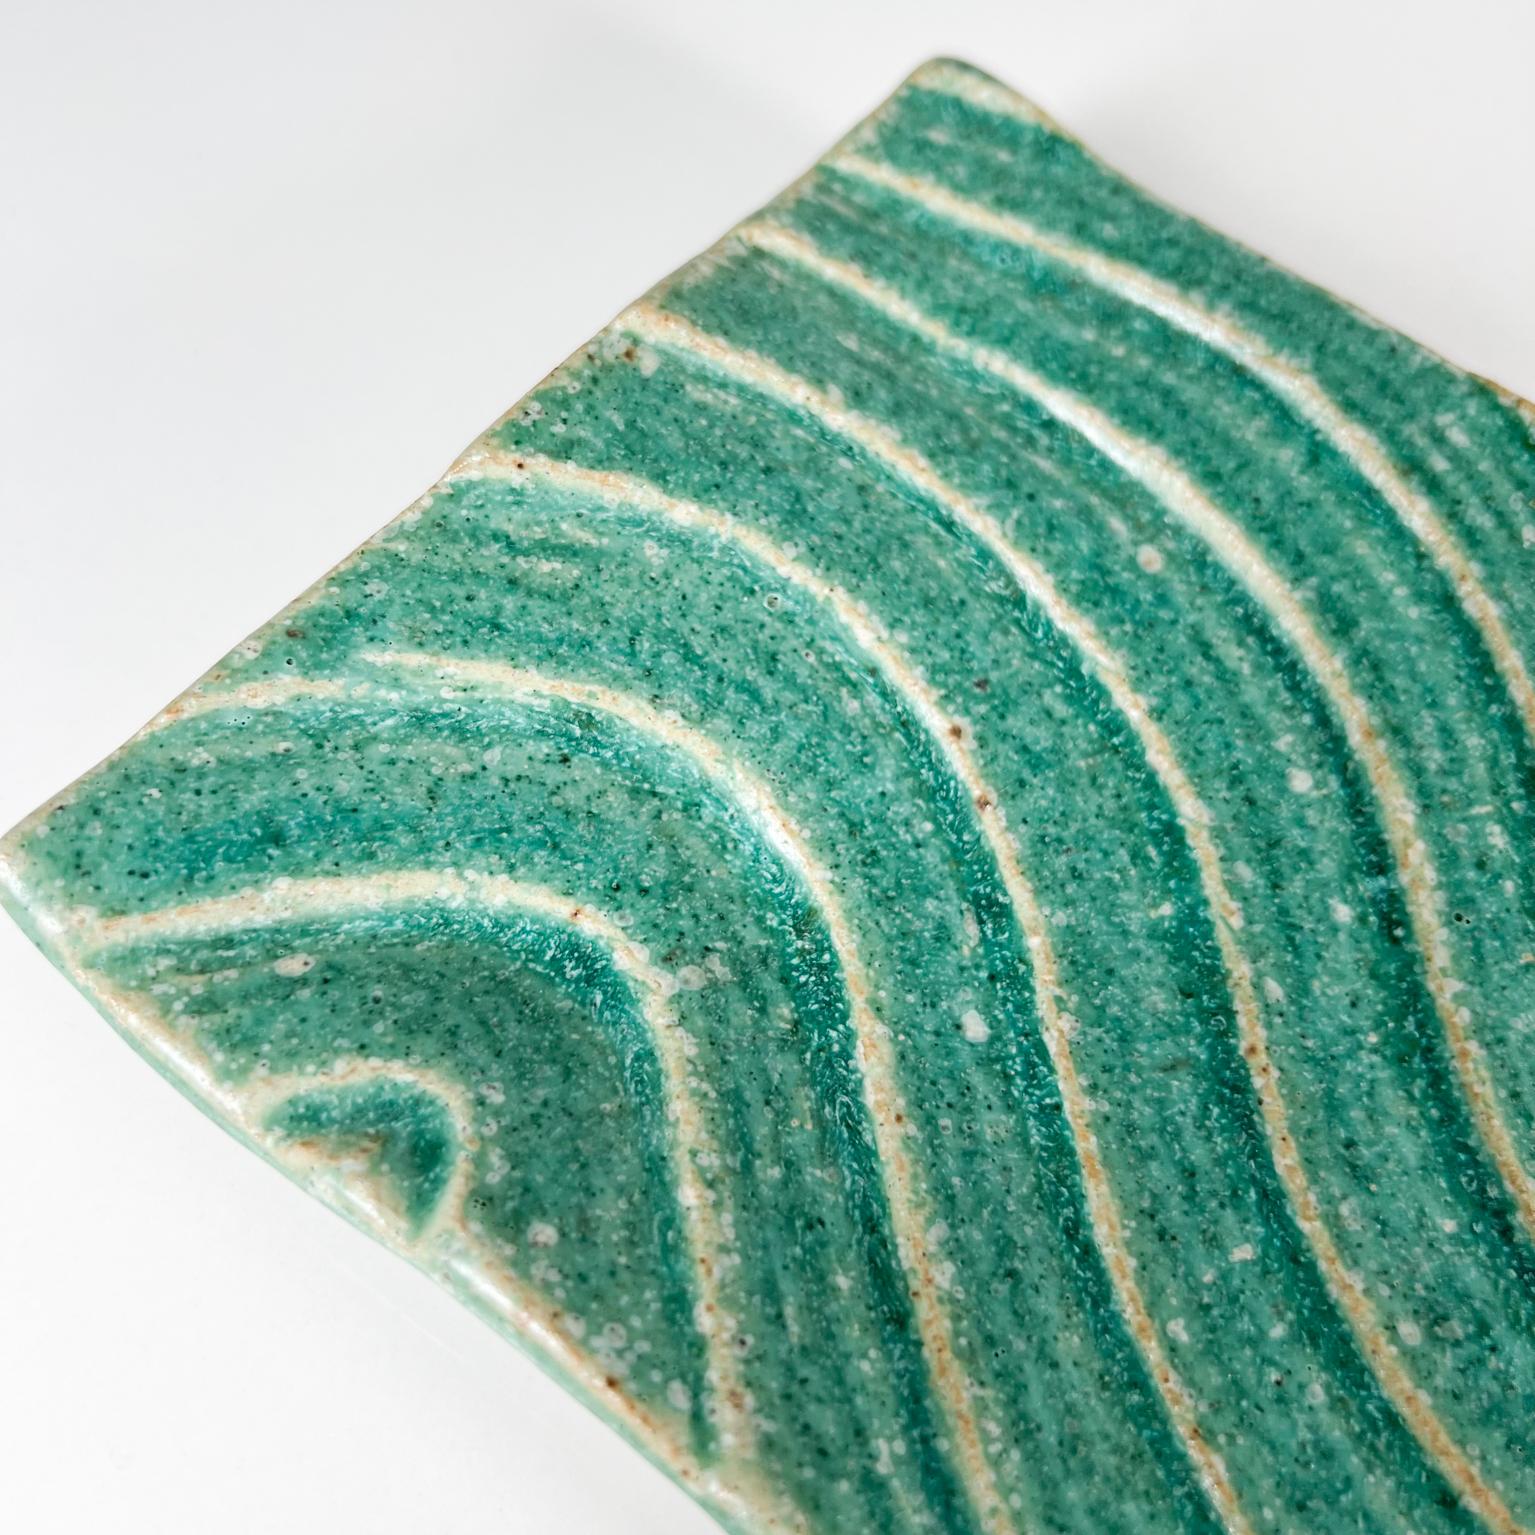 1970s Sculptural Green Wave Dish Studio Pottery Art Ed Thompson For Sale 1